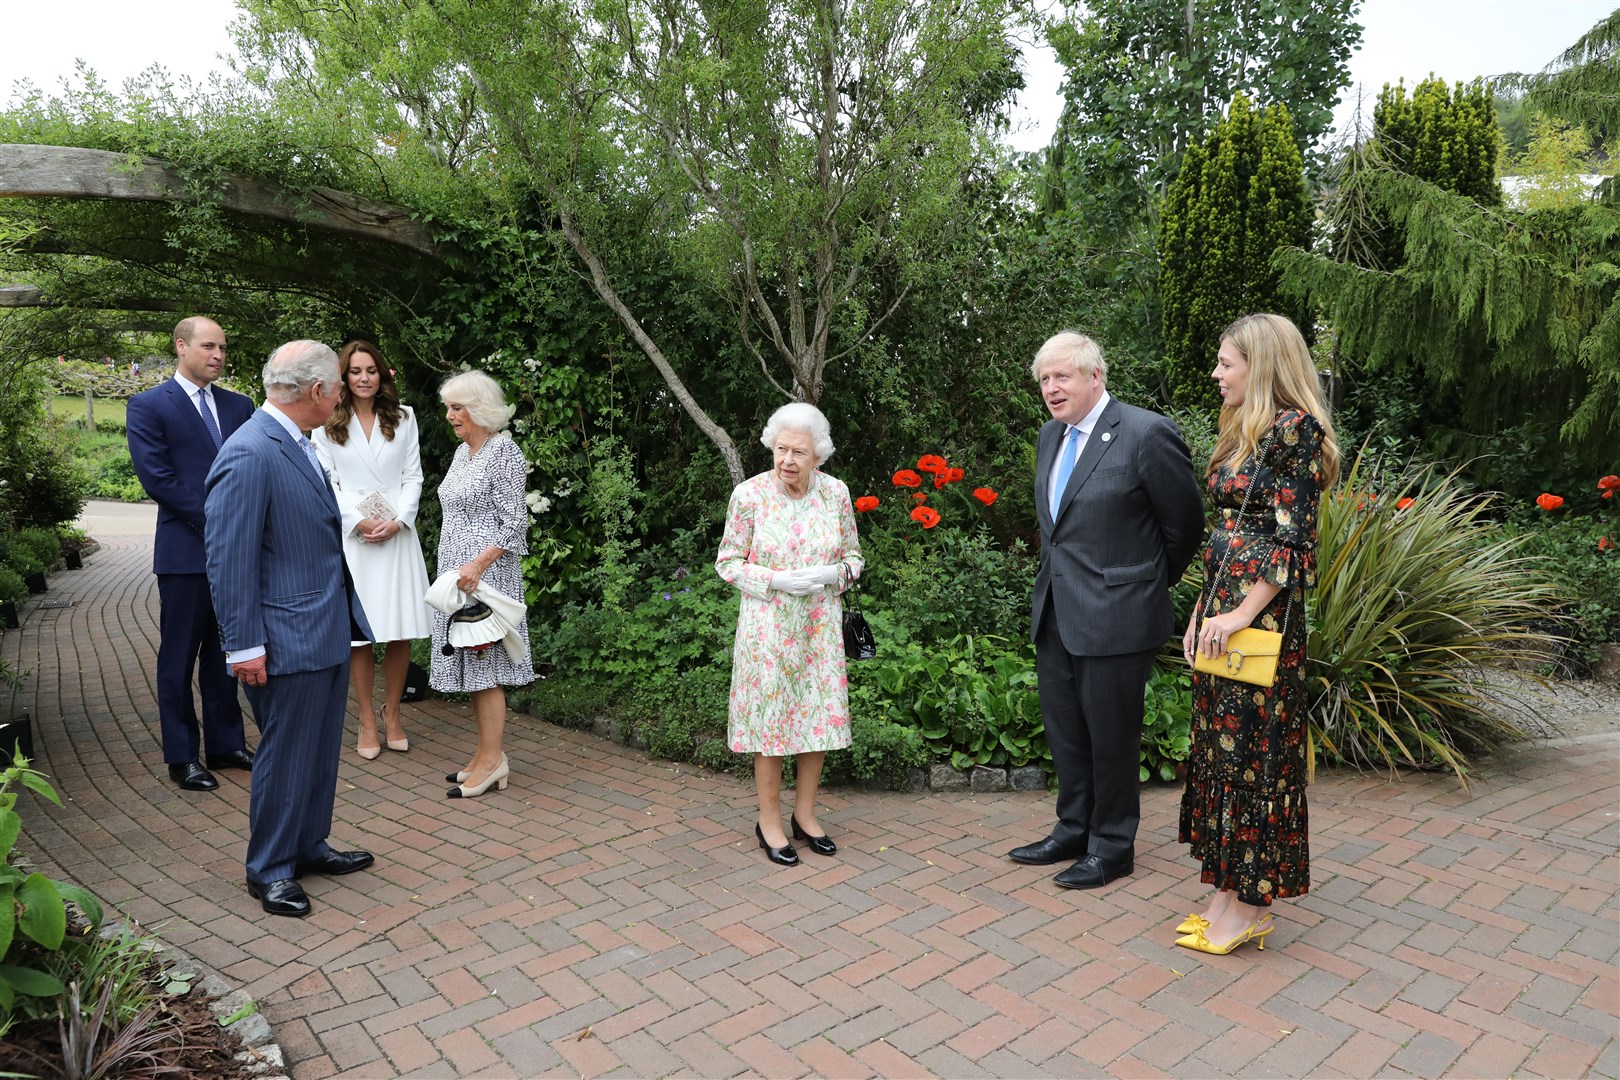 The Queen, the Prince of Wales, the Duchess of Cornwall and the Duke and Duchess of Cambridge attend a reception at the Eden Project with Prime Minister Boris Johnson and wife Carrie during the G7 summit in Cornwall (Jack Hill/The Times/PA)